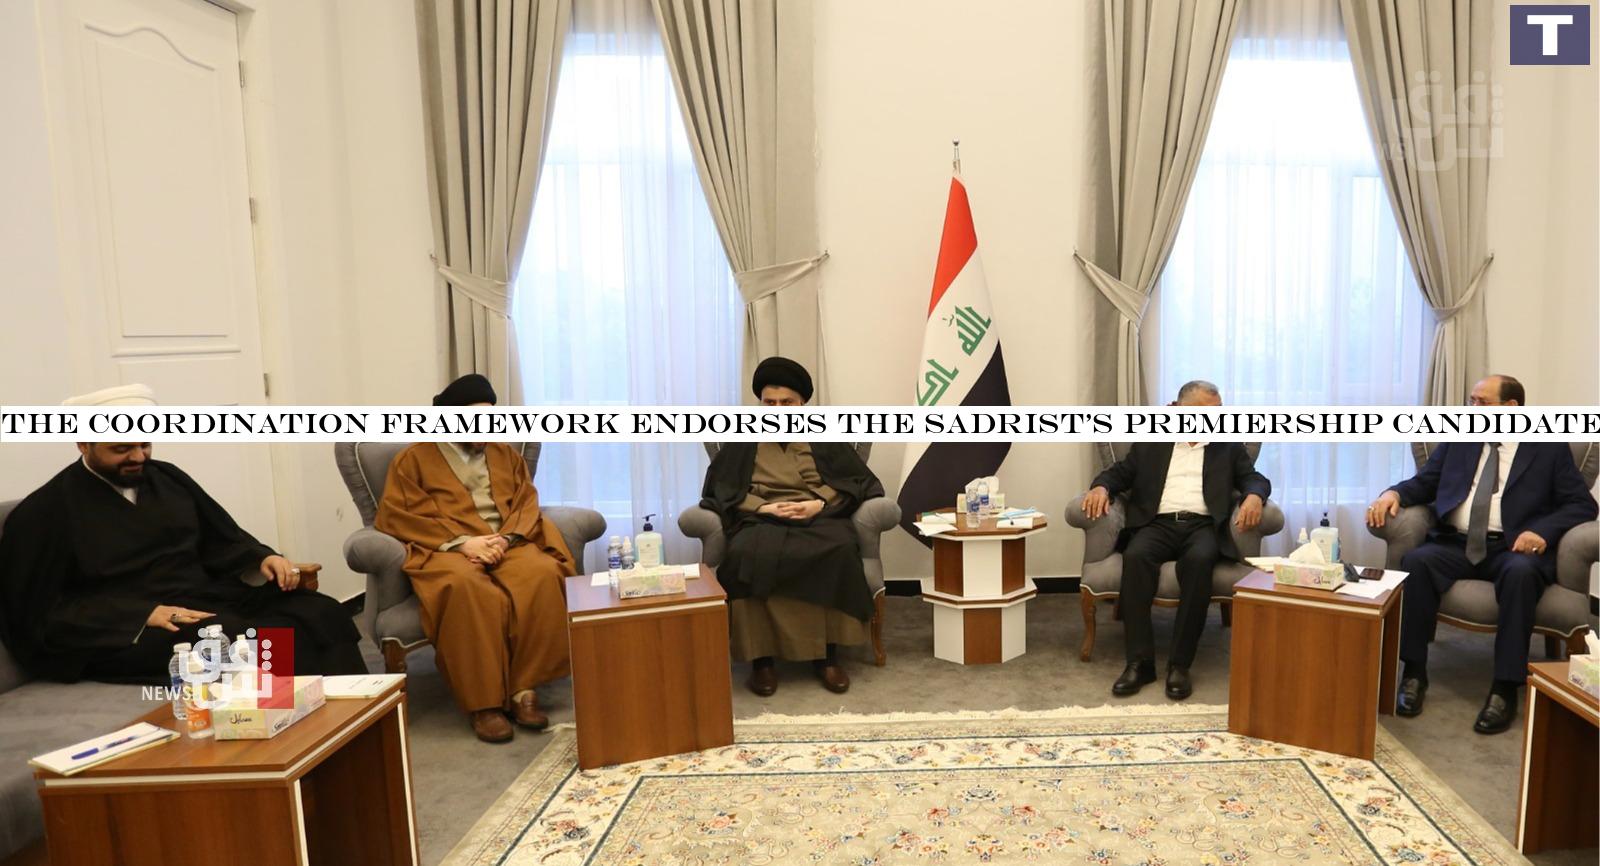 The Coordination Framework endorses the Sadrist's premiership candidate, names others for discussion